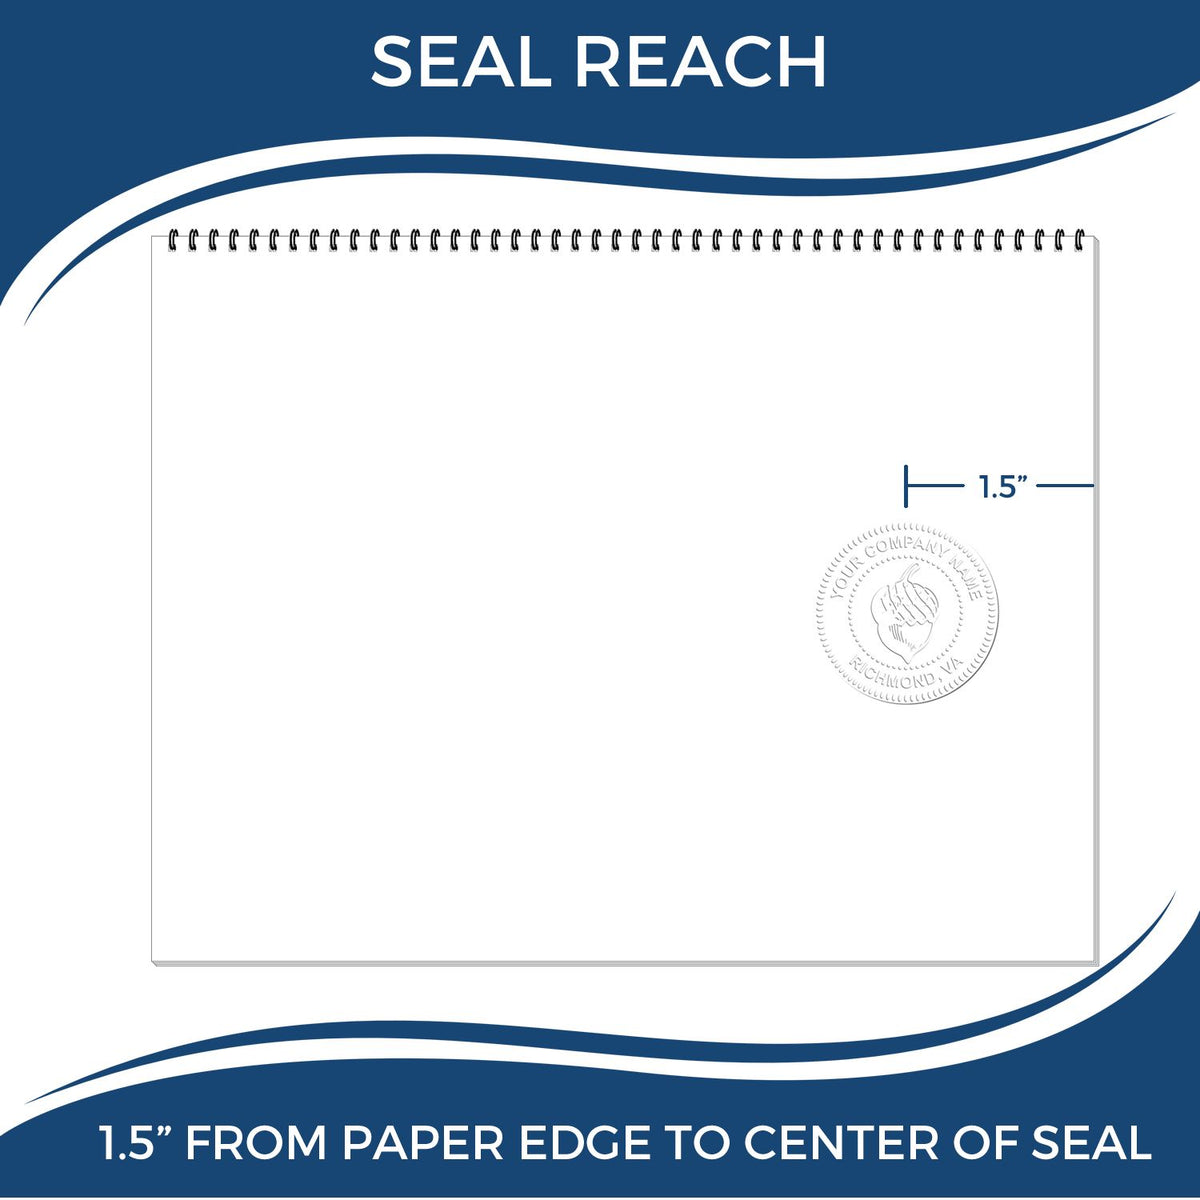 An infographic showing the seal reach which is represented by a ruler and a miniature seal image of the Gift Wyoming Geologist Seal